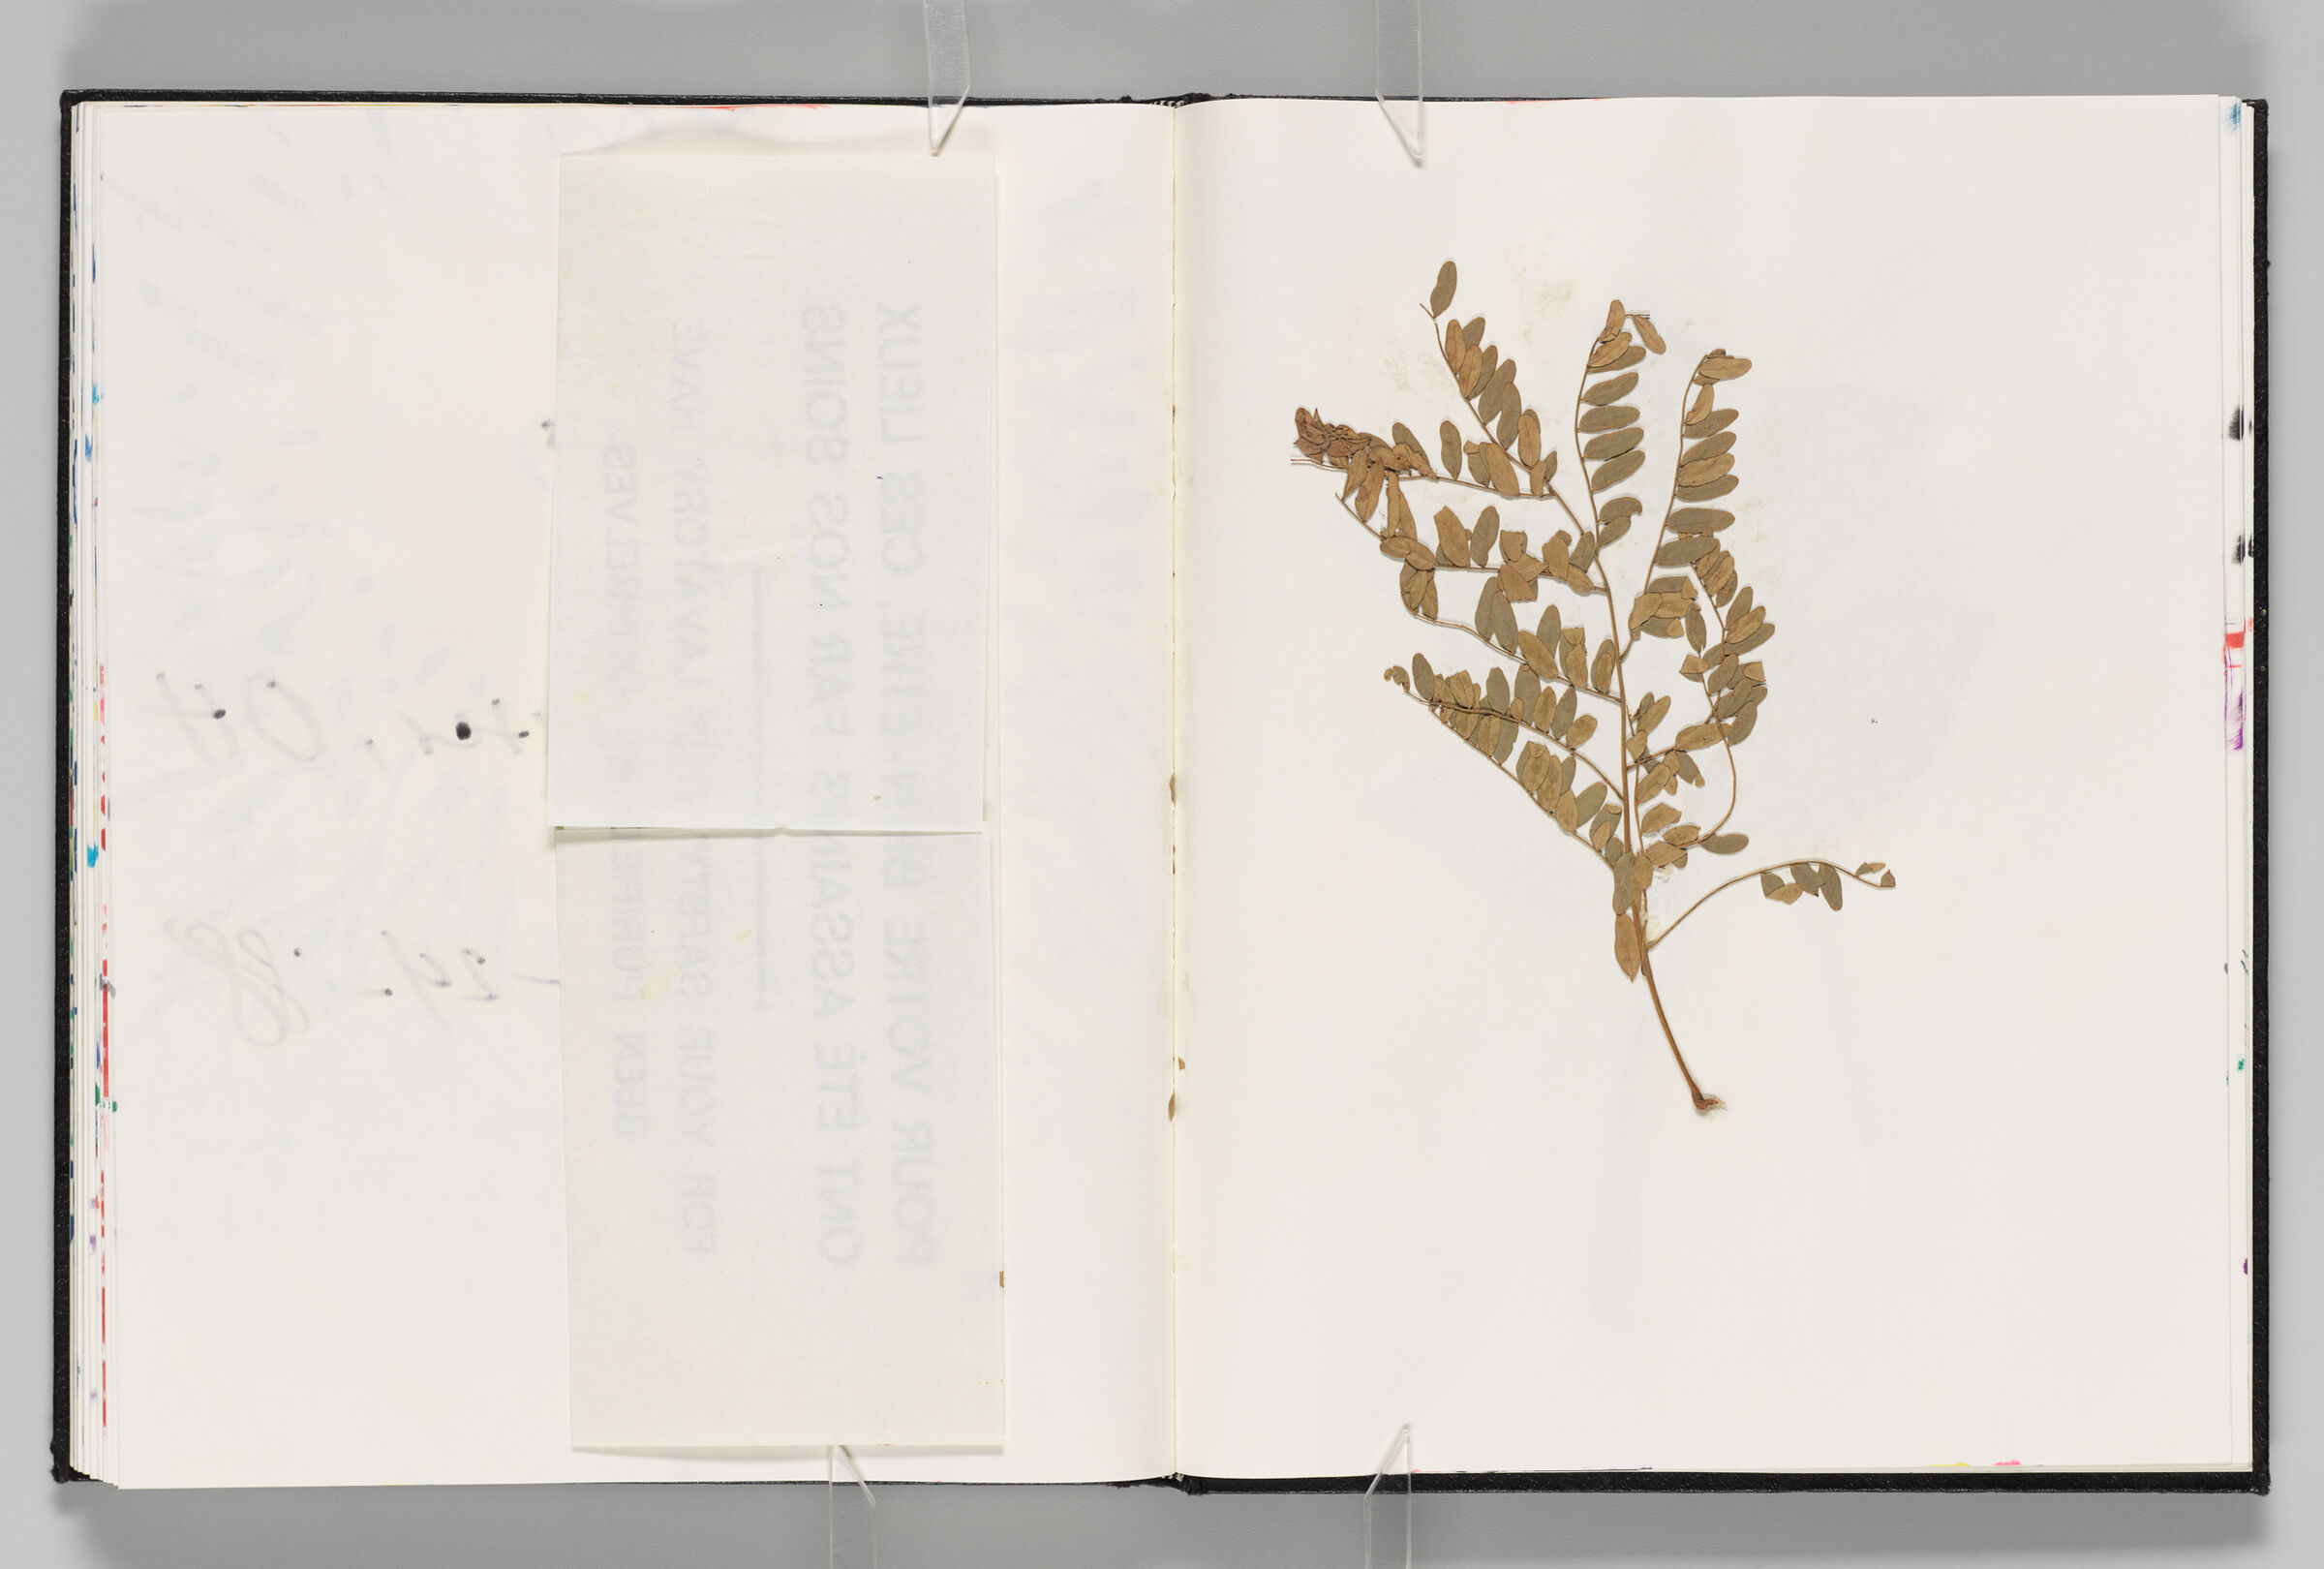 Untitled (Bleed-Through Of Previous Page, Left Page); Untitled (Pressed And Adhered Leaf, Right Page)